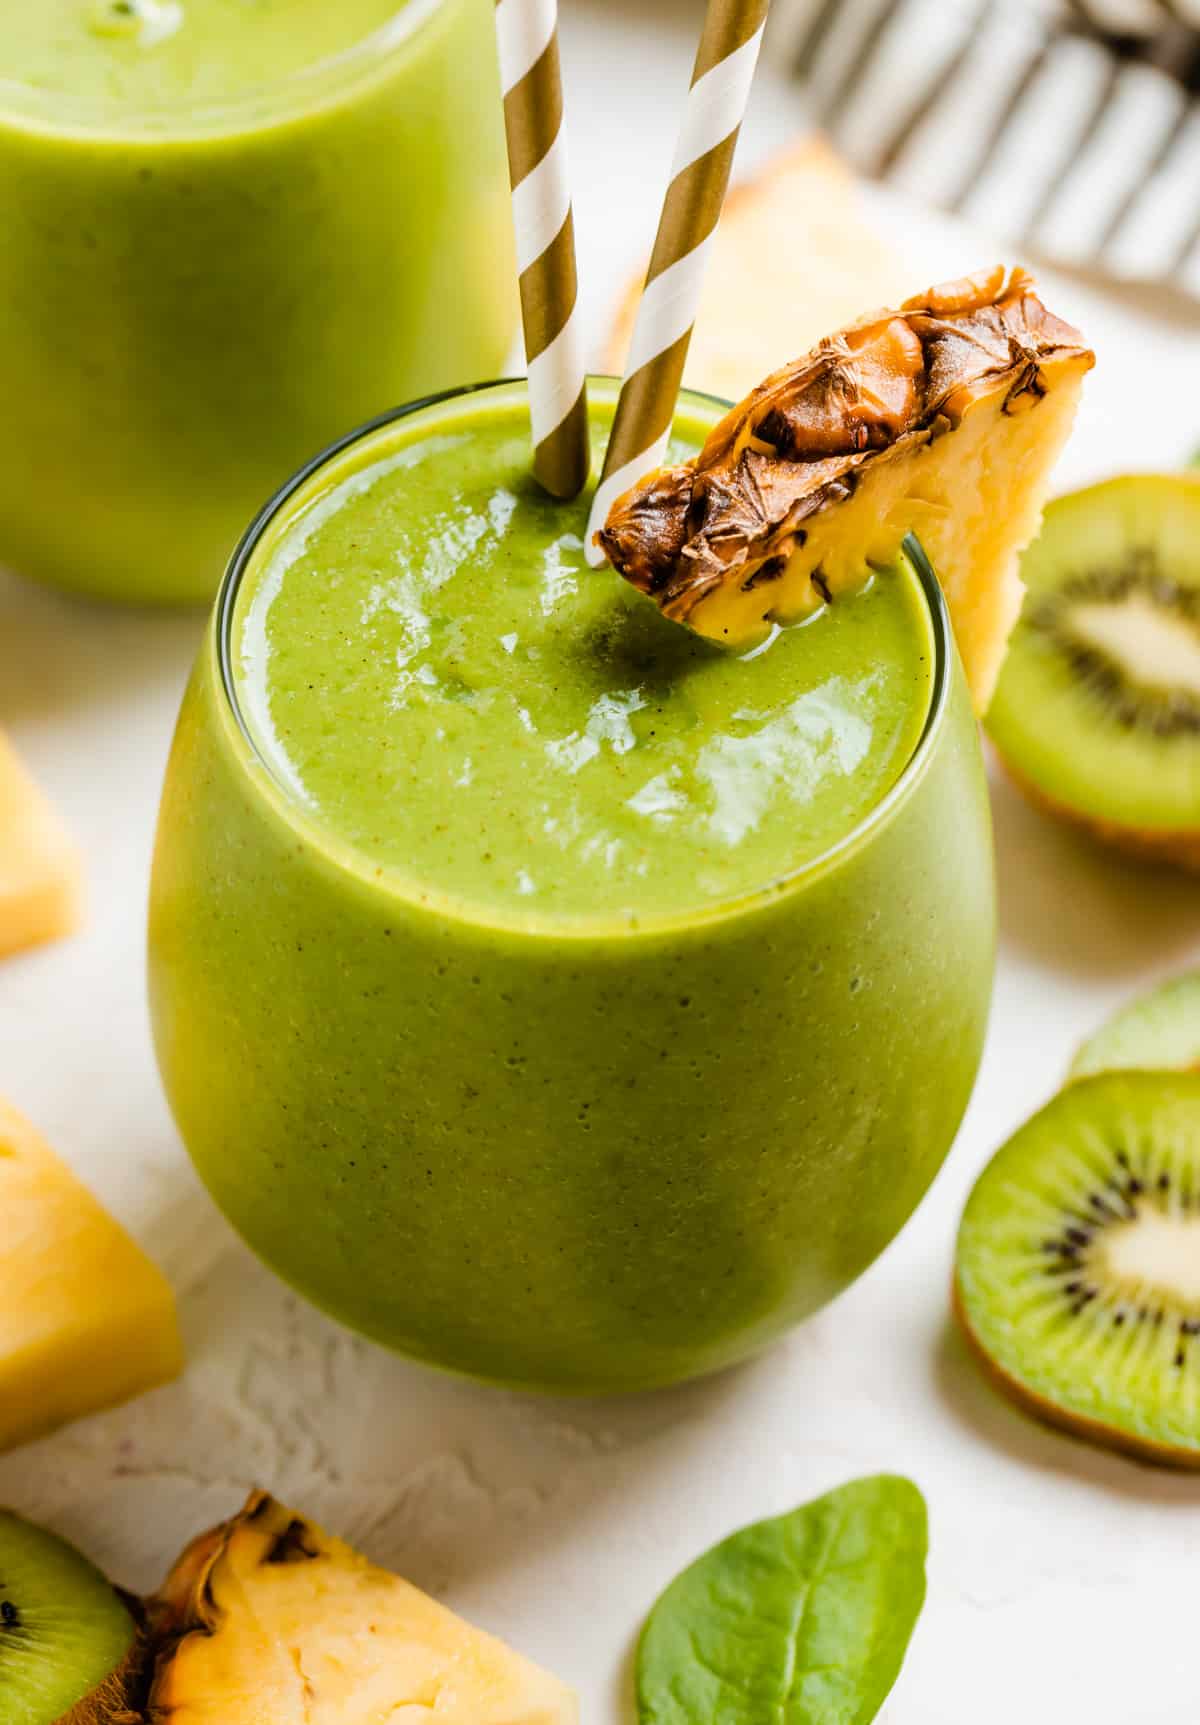 Pineapple kiwi smoothie in glass with pineapple and kiwi slices.